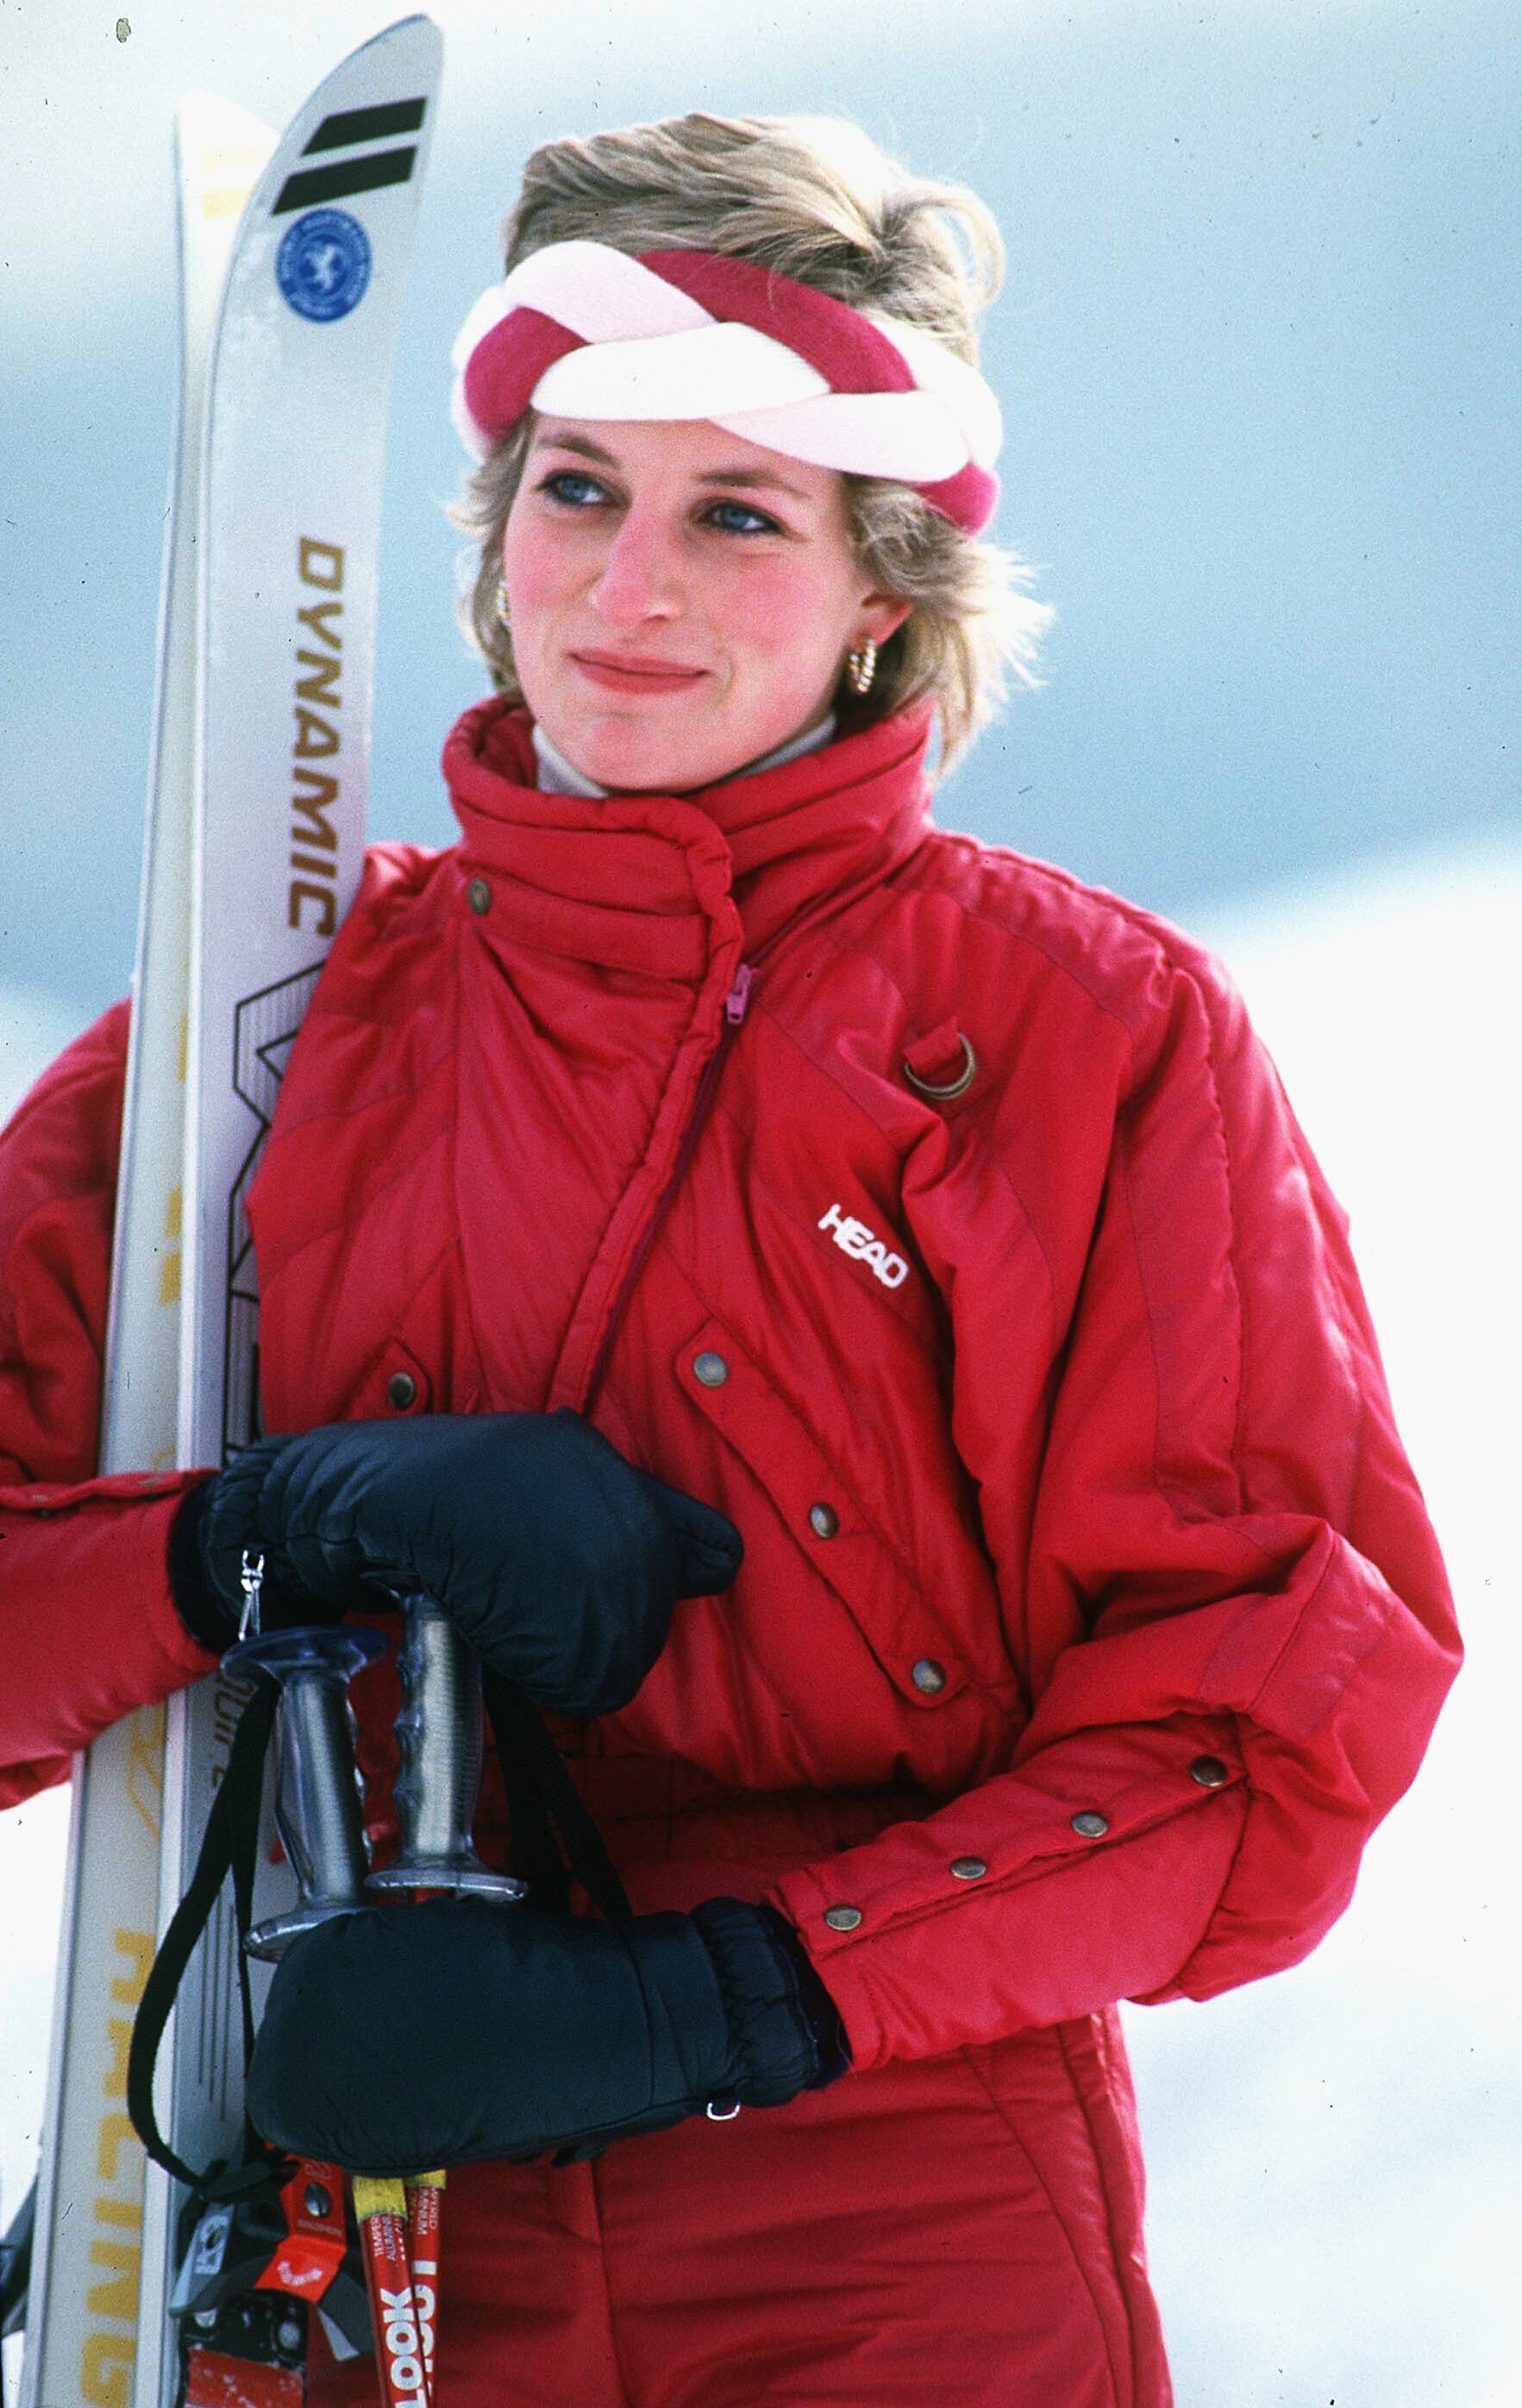 Check out the cool Winter headband on Diana while skiing.